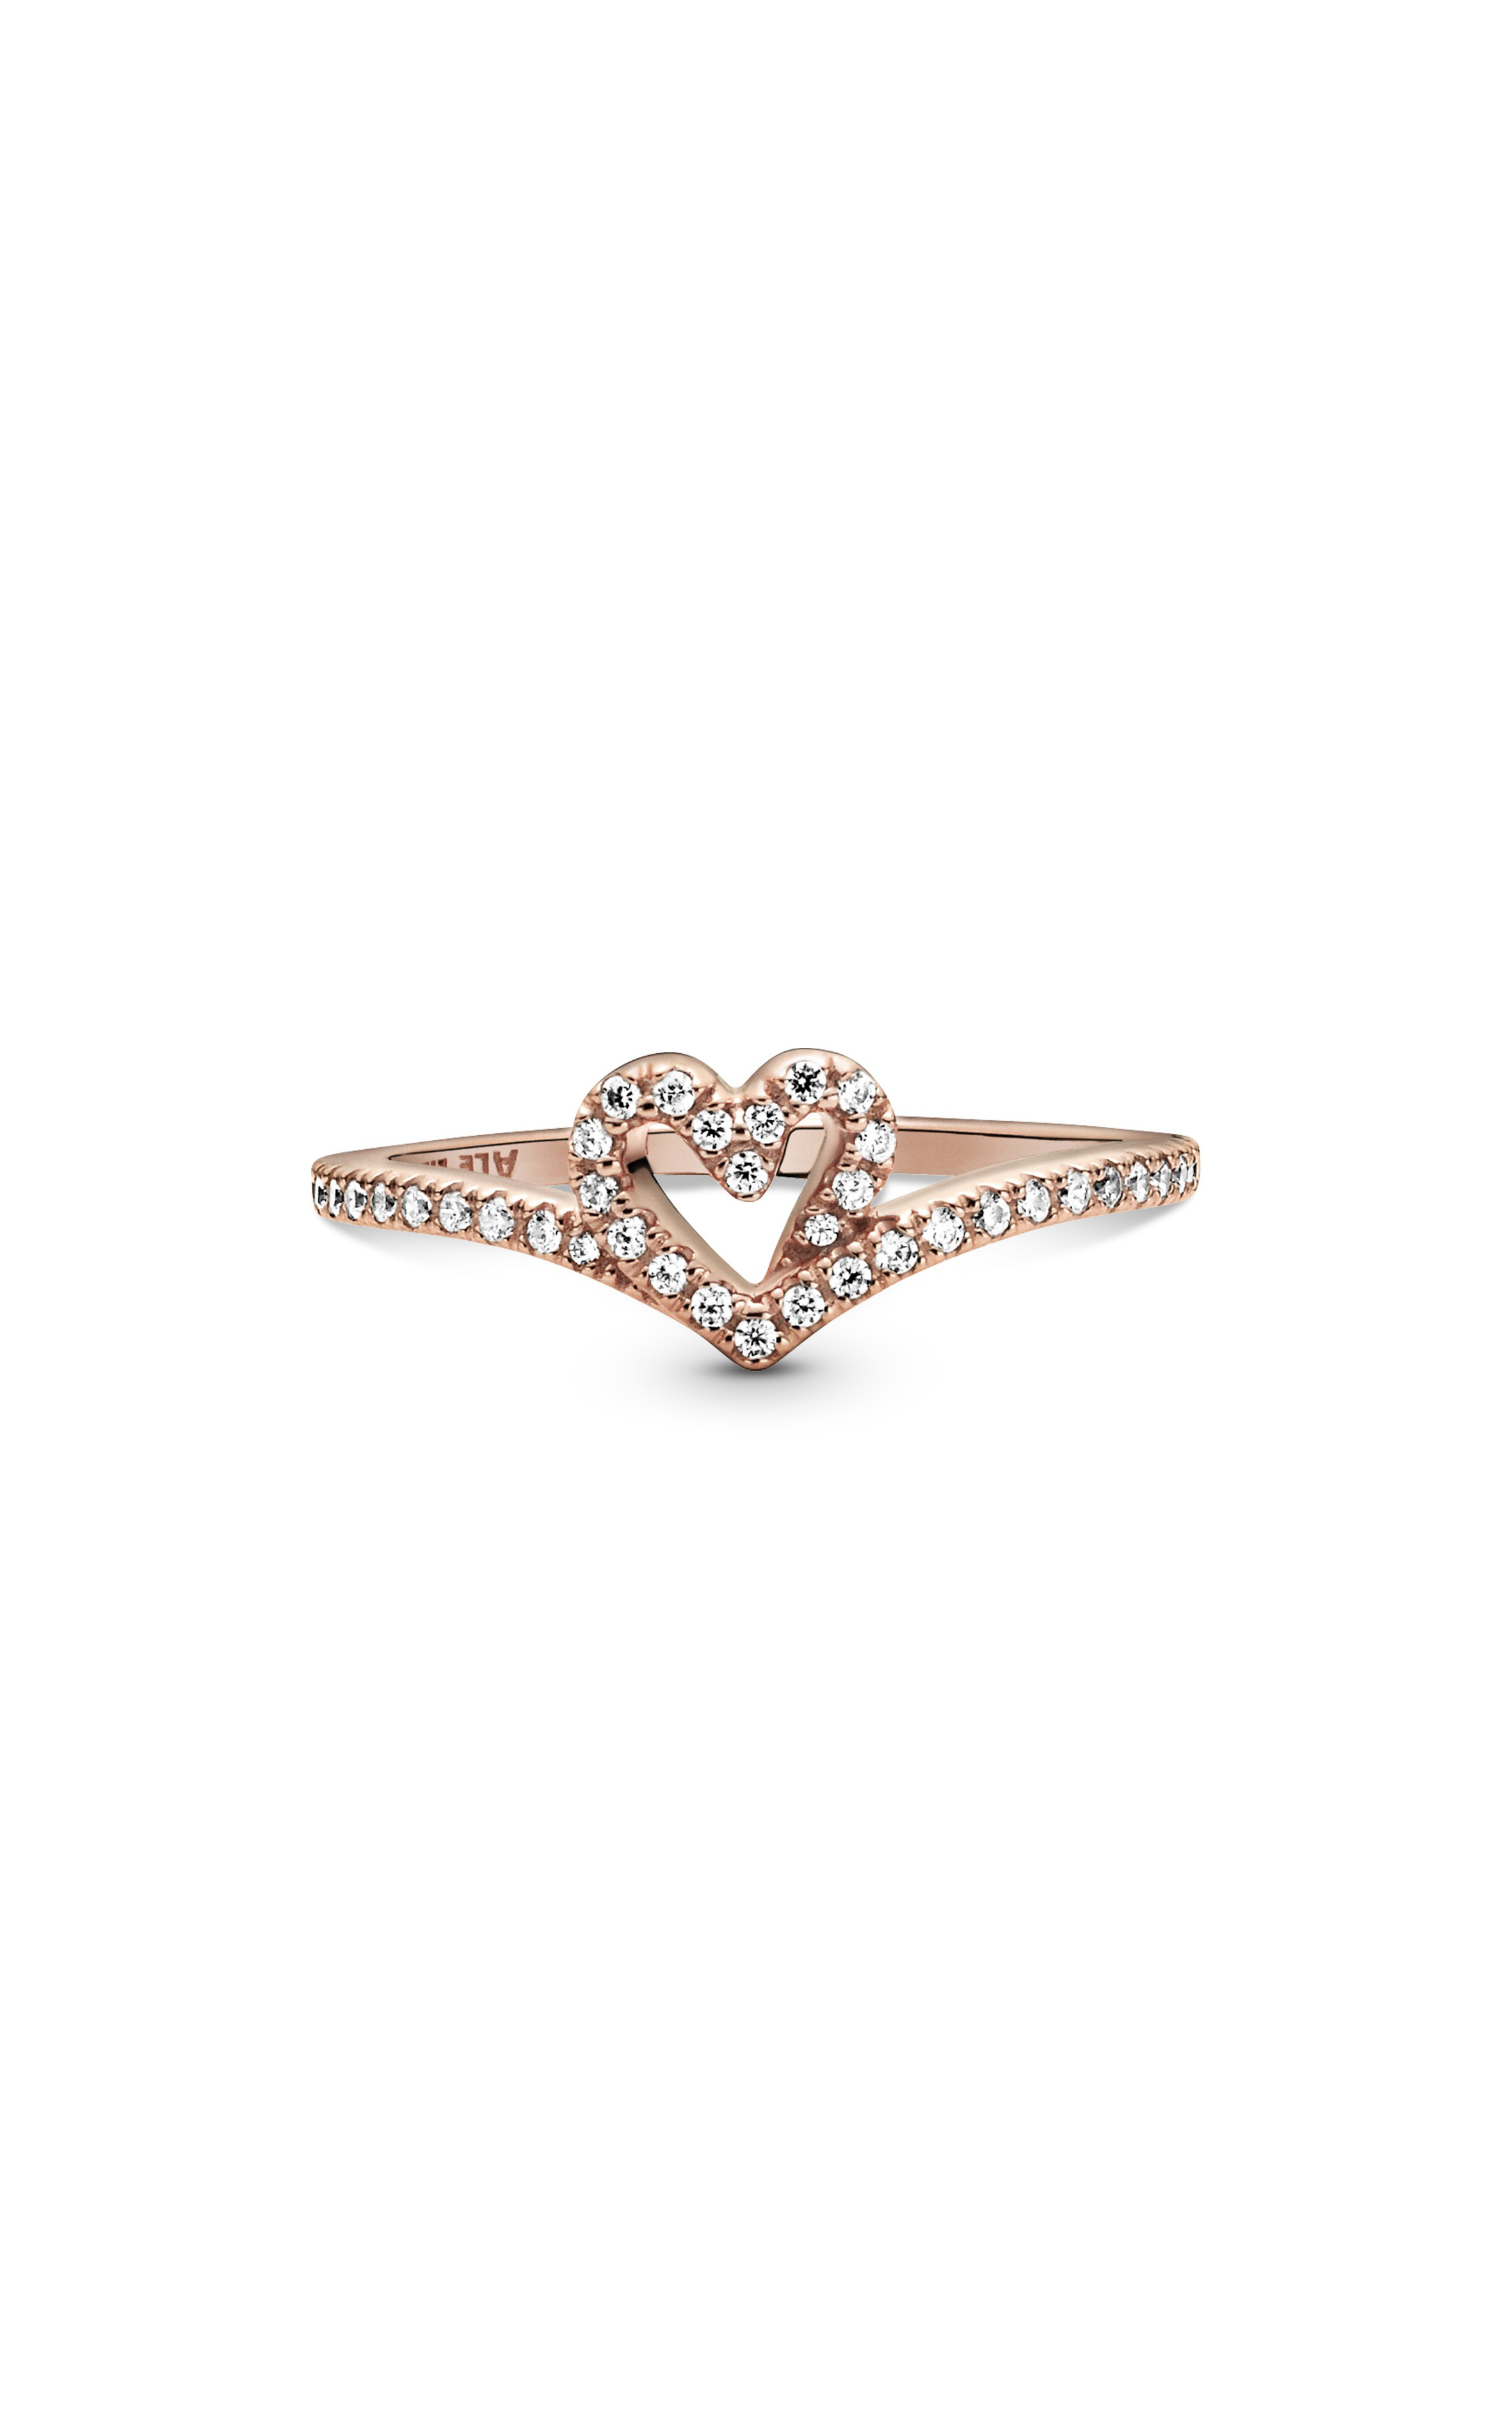 PANDORA Ring, Radiant Heart Ring, 14k Rose Gold Plated & Clear CZ - Size 56  - American Jewelry